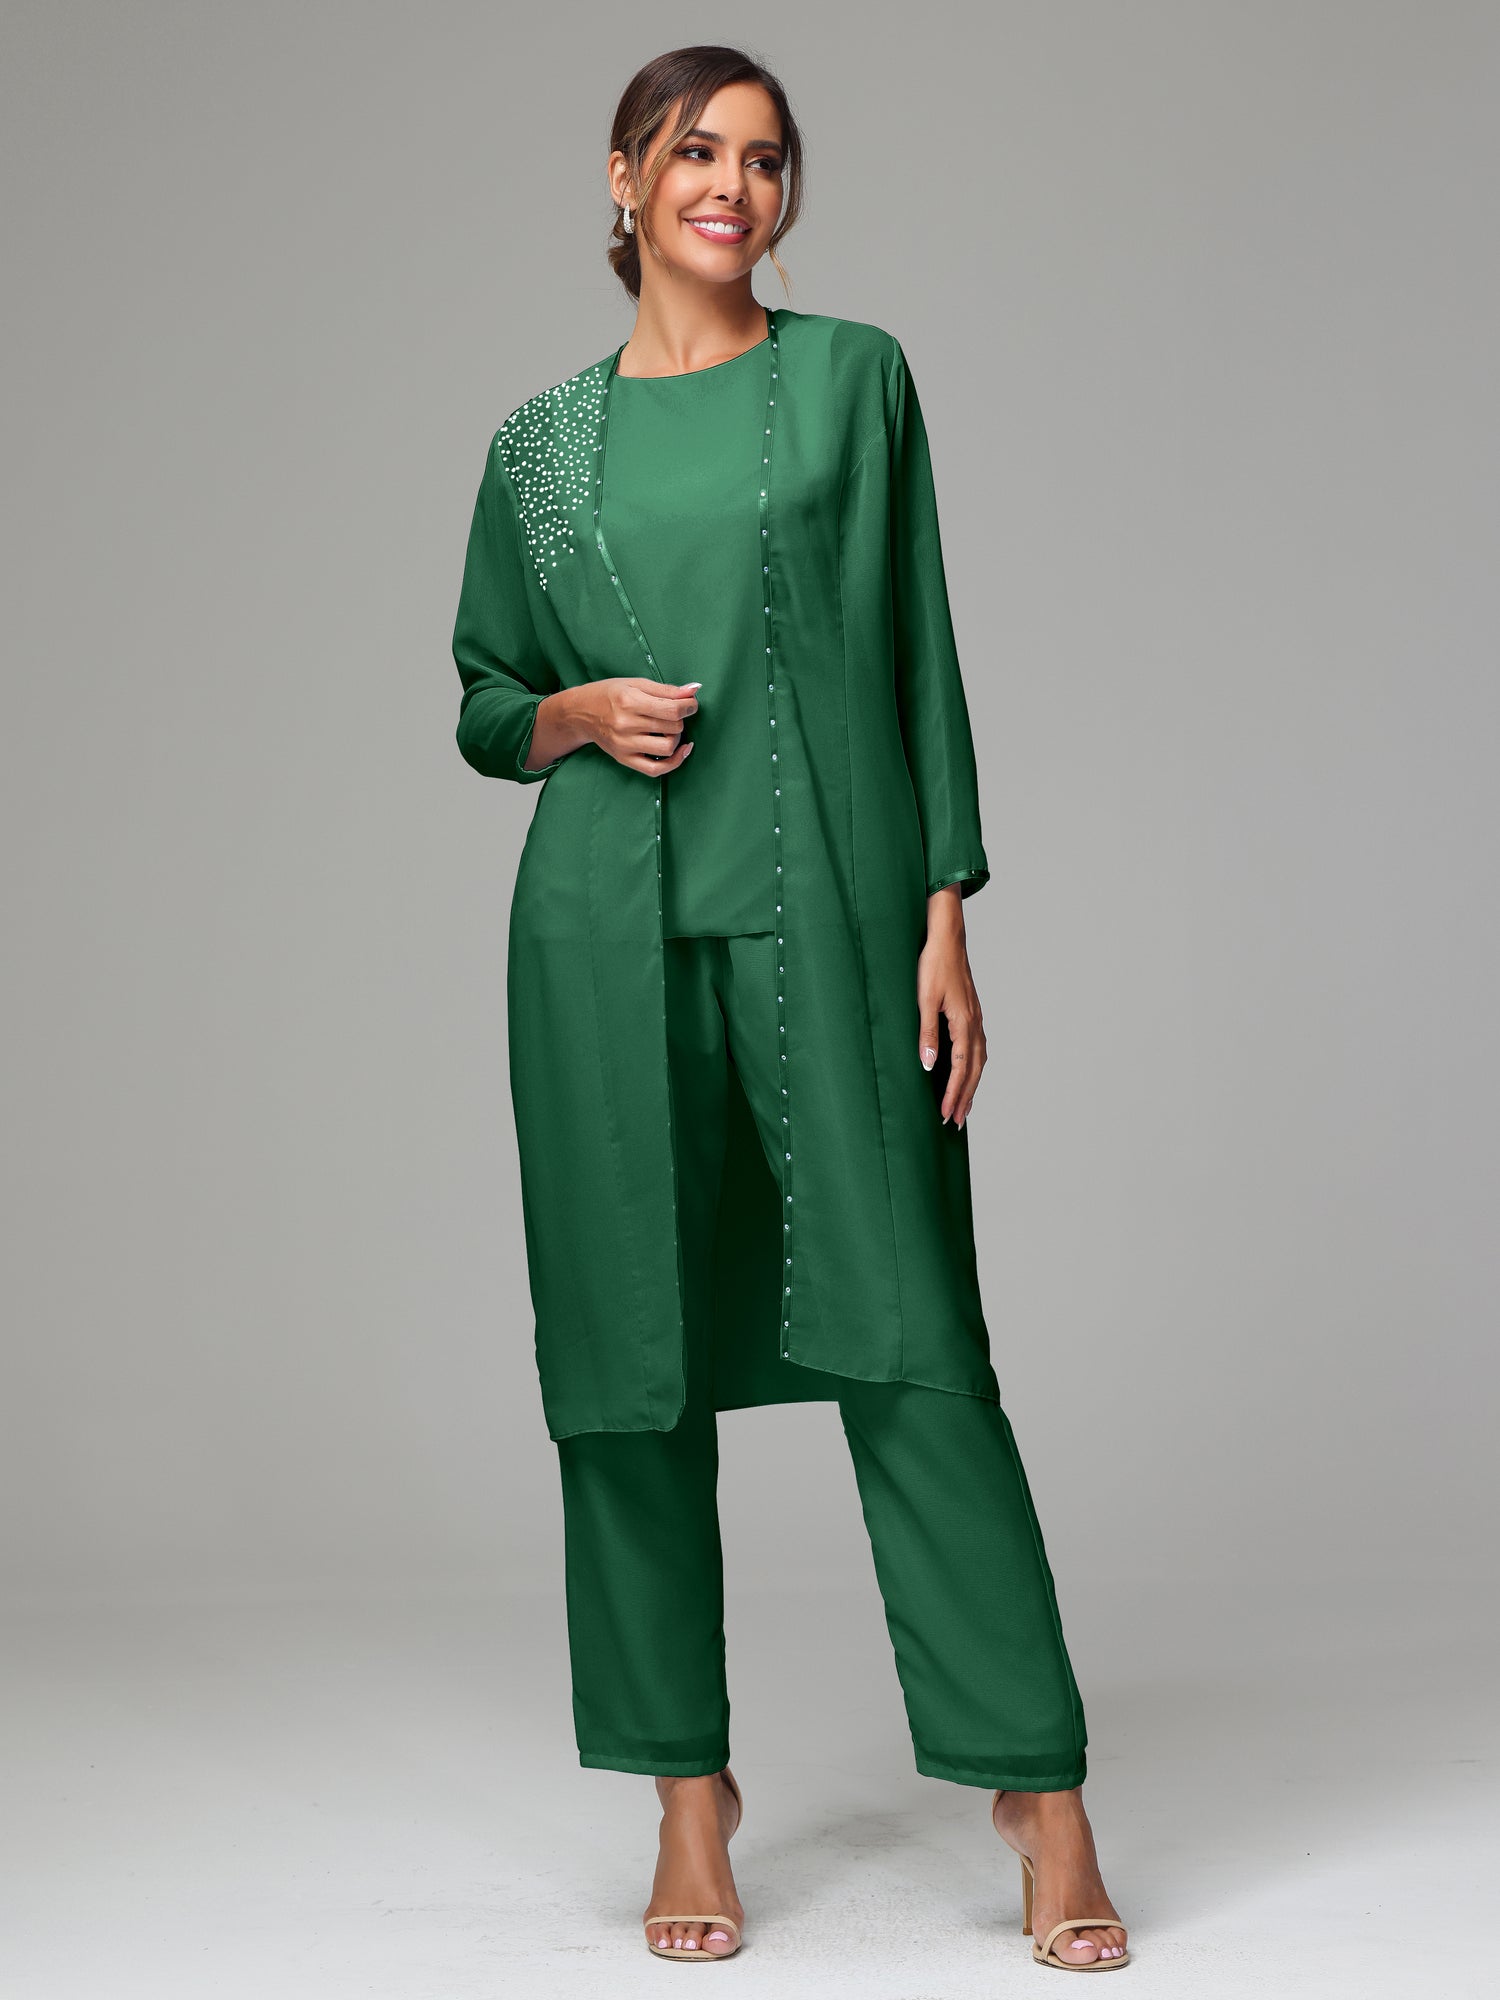 LOVELY SHWESHWE PANTS AND DRESSES WITH MODERN FABRICS | New look fashion,  African traditional wear, African fashion skirts